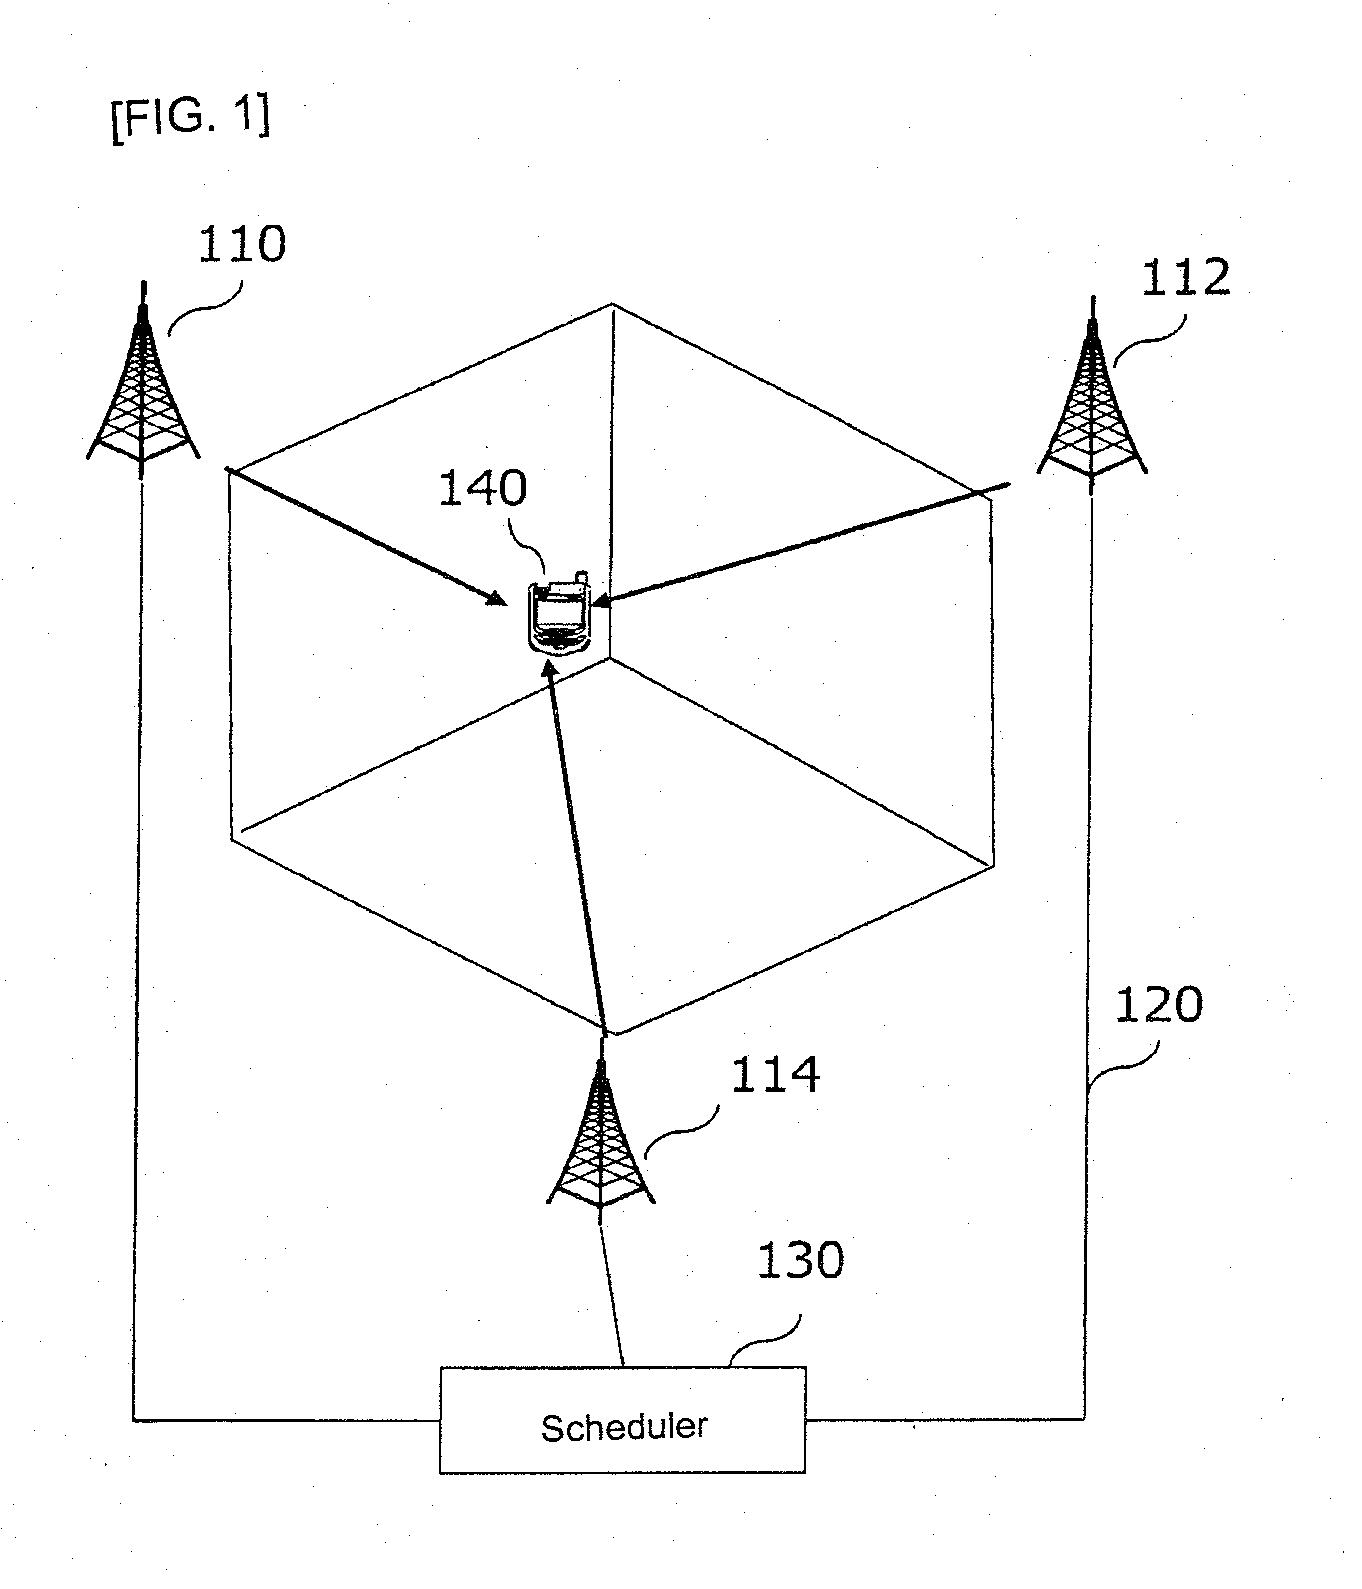 Method and Apparatus for Data Communication Through a Coordinated Multi-Point Transmission